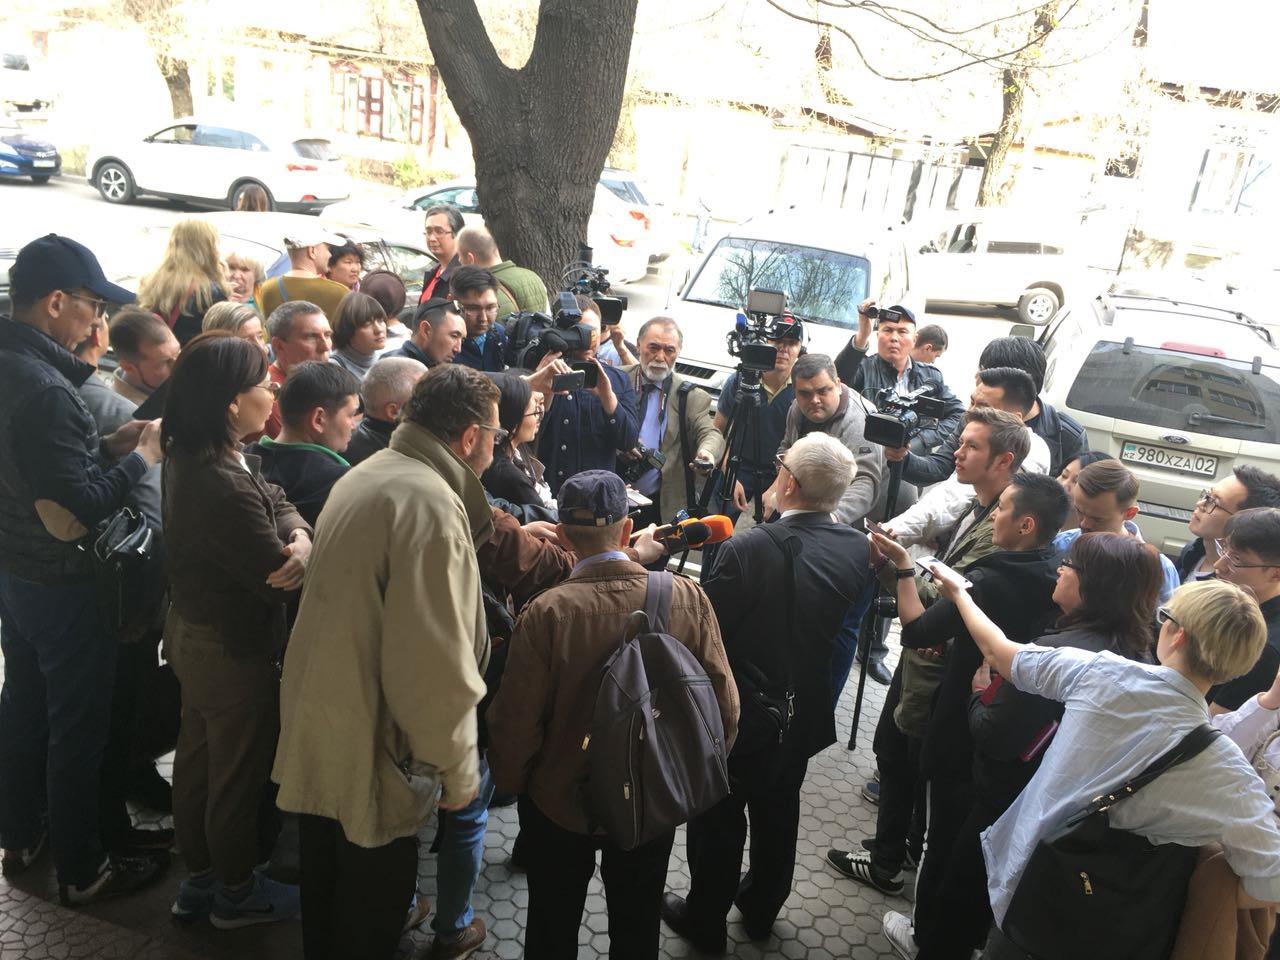 Journalists, others gather around Vadim Boreiko, journalist and regular contributor to Ratel.kz, for comment after the April 5 court hearing against Ratel.kz and chief editor Marat Asipov. 